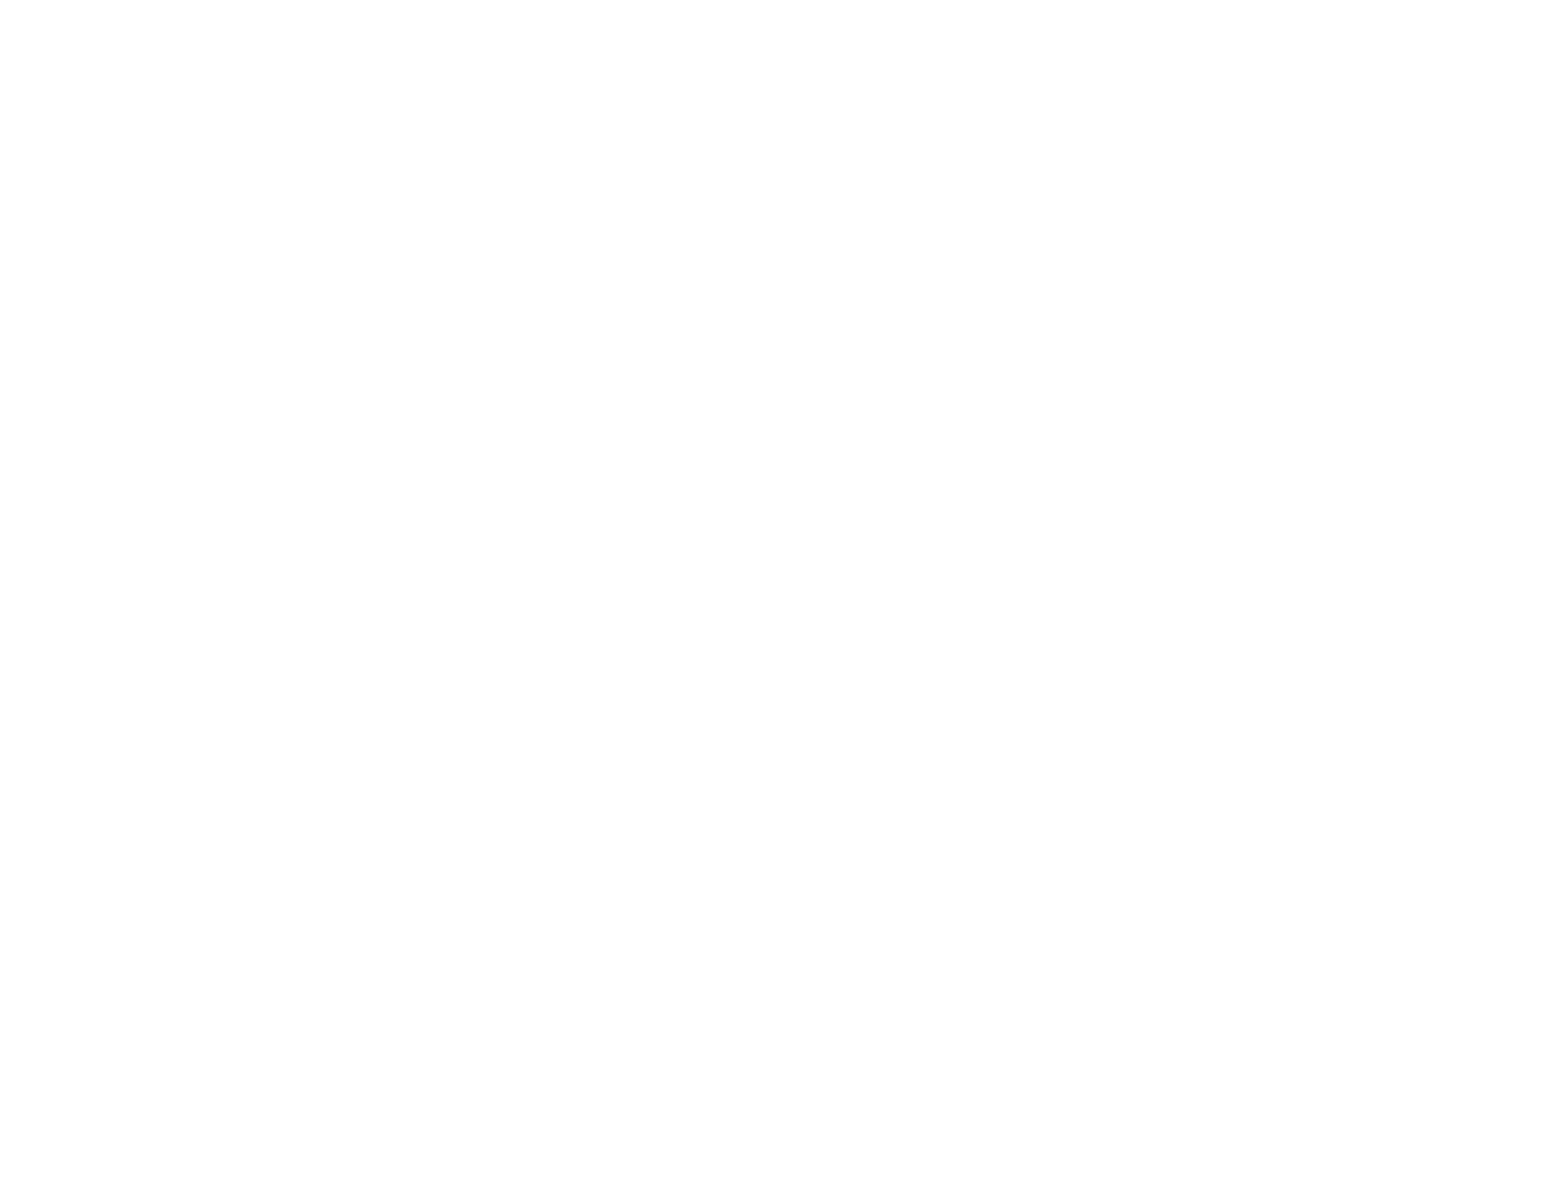 Math equations on a dark background indicative of an educational setting, such as a classroom blackboard